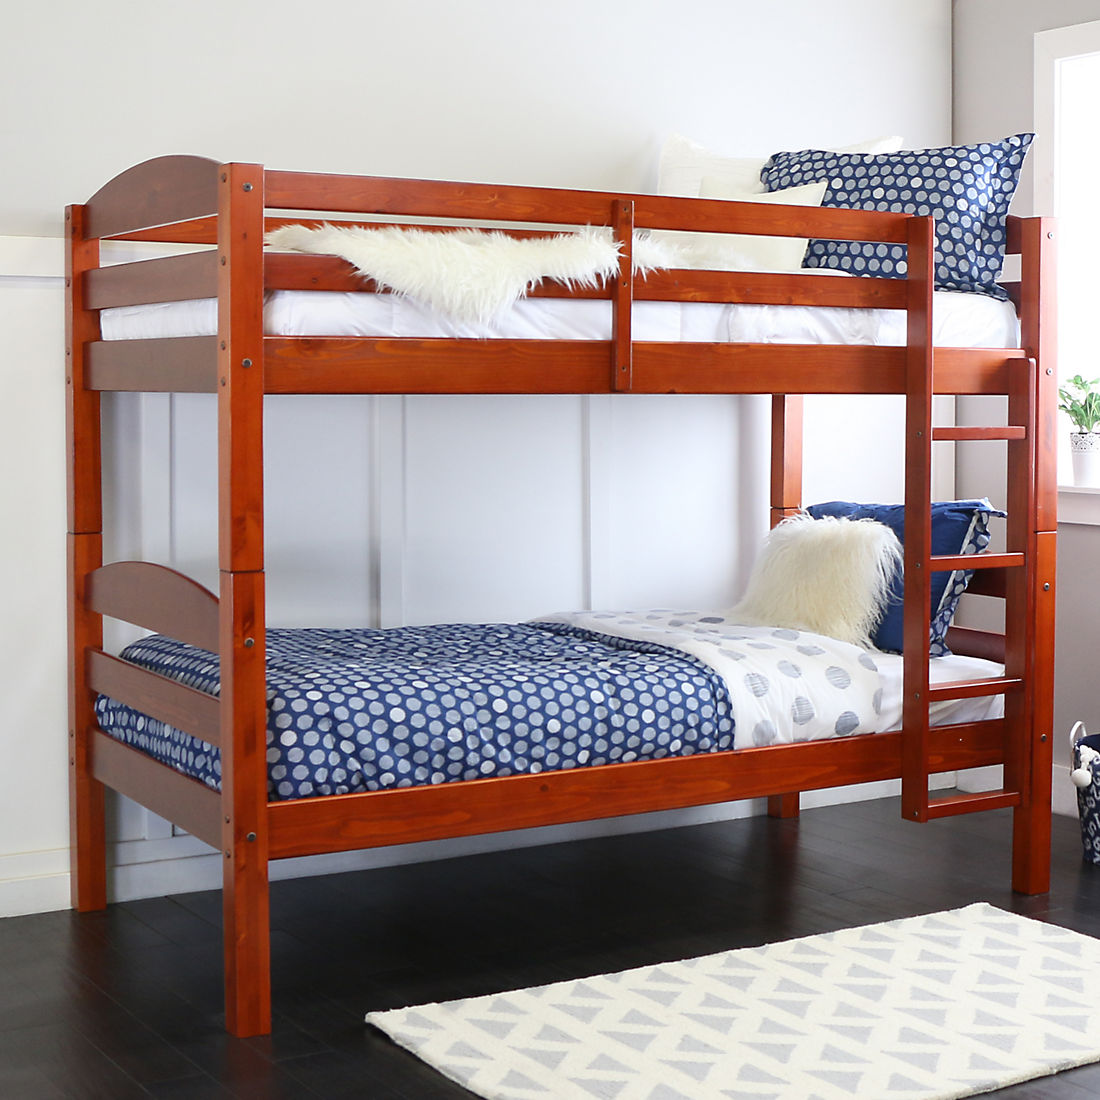 W Trends Twin Size Solid Wood Bunk Bed, Cherry Bunk Beds